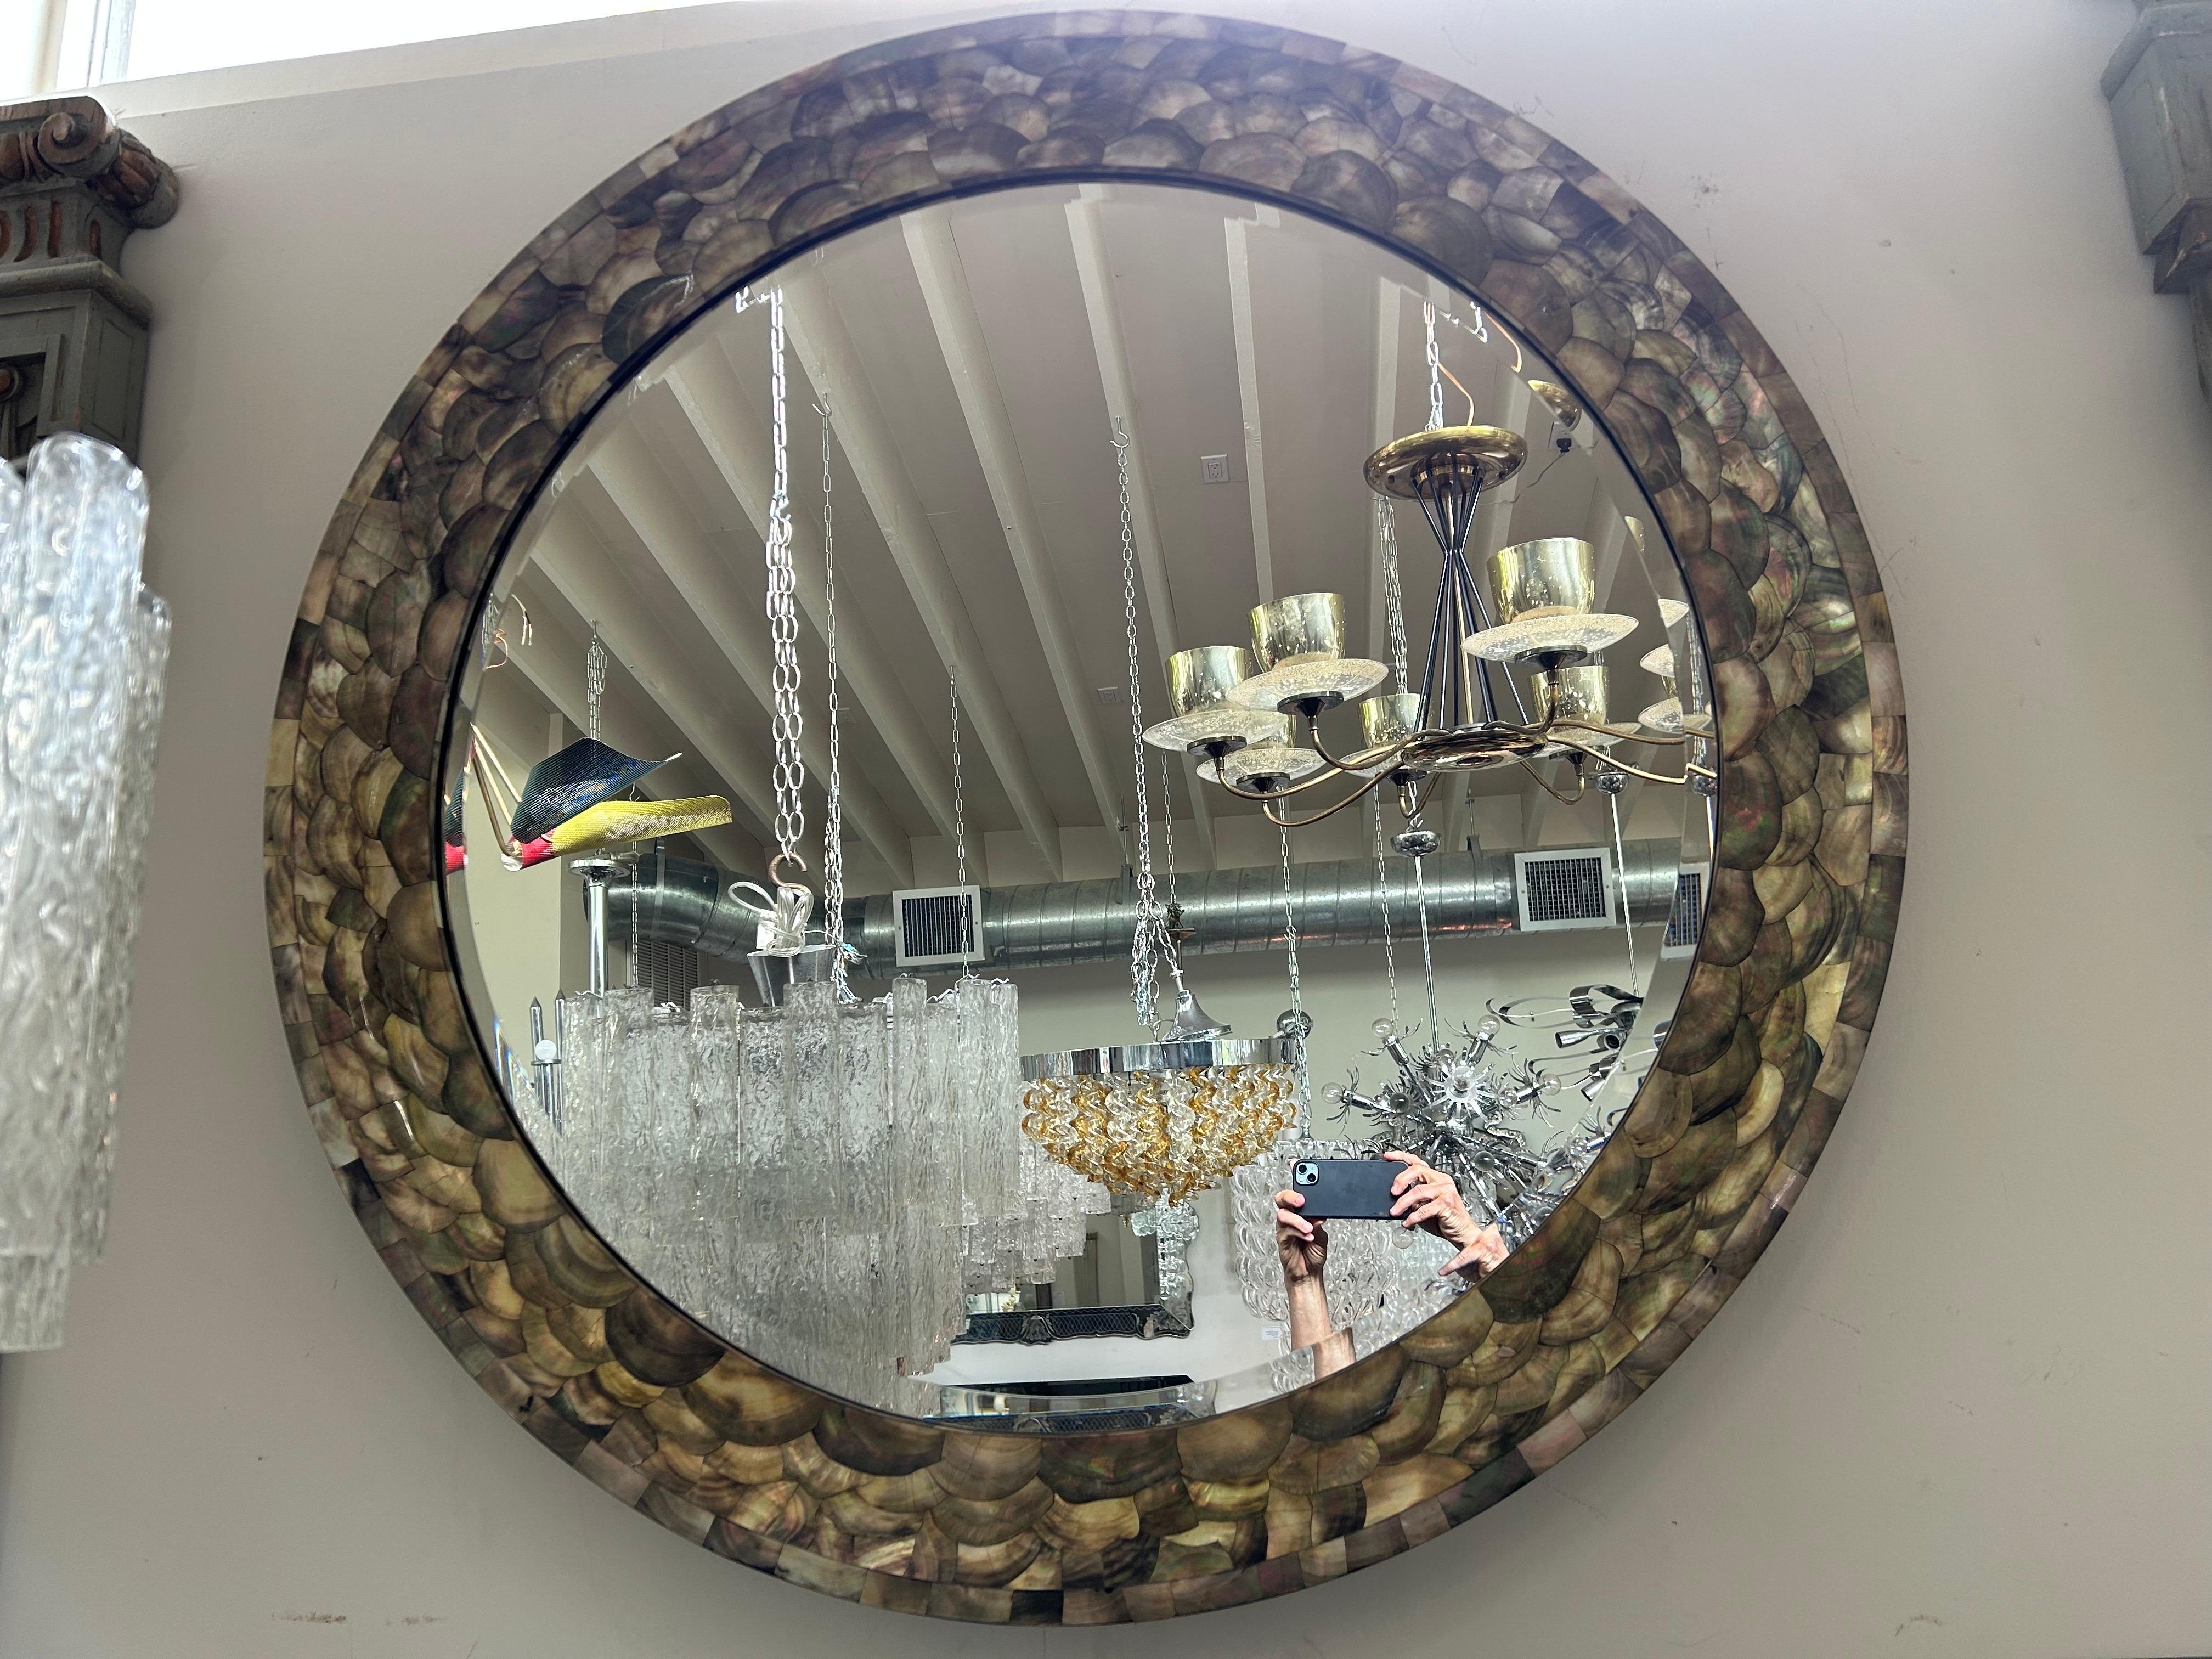 Vintage 47 Inch Round Abalone Beveled Mirror.
This stunning monumental Karl Springer style round beveled mirror is expertly crafted with artistically placed pieces of abalone including the exterior.
Our versatile mirror would look grand in an